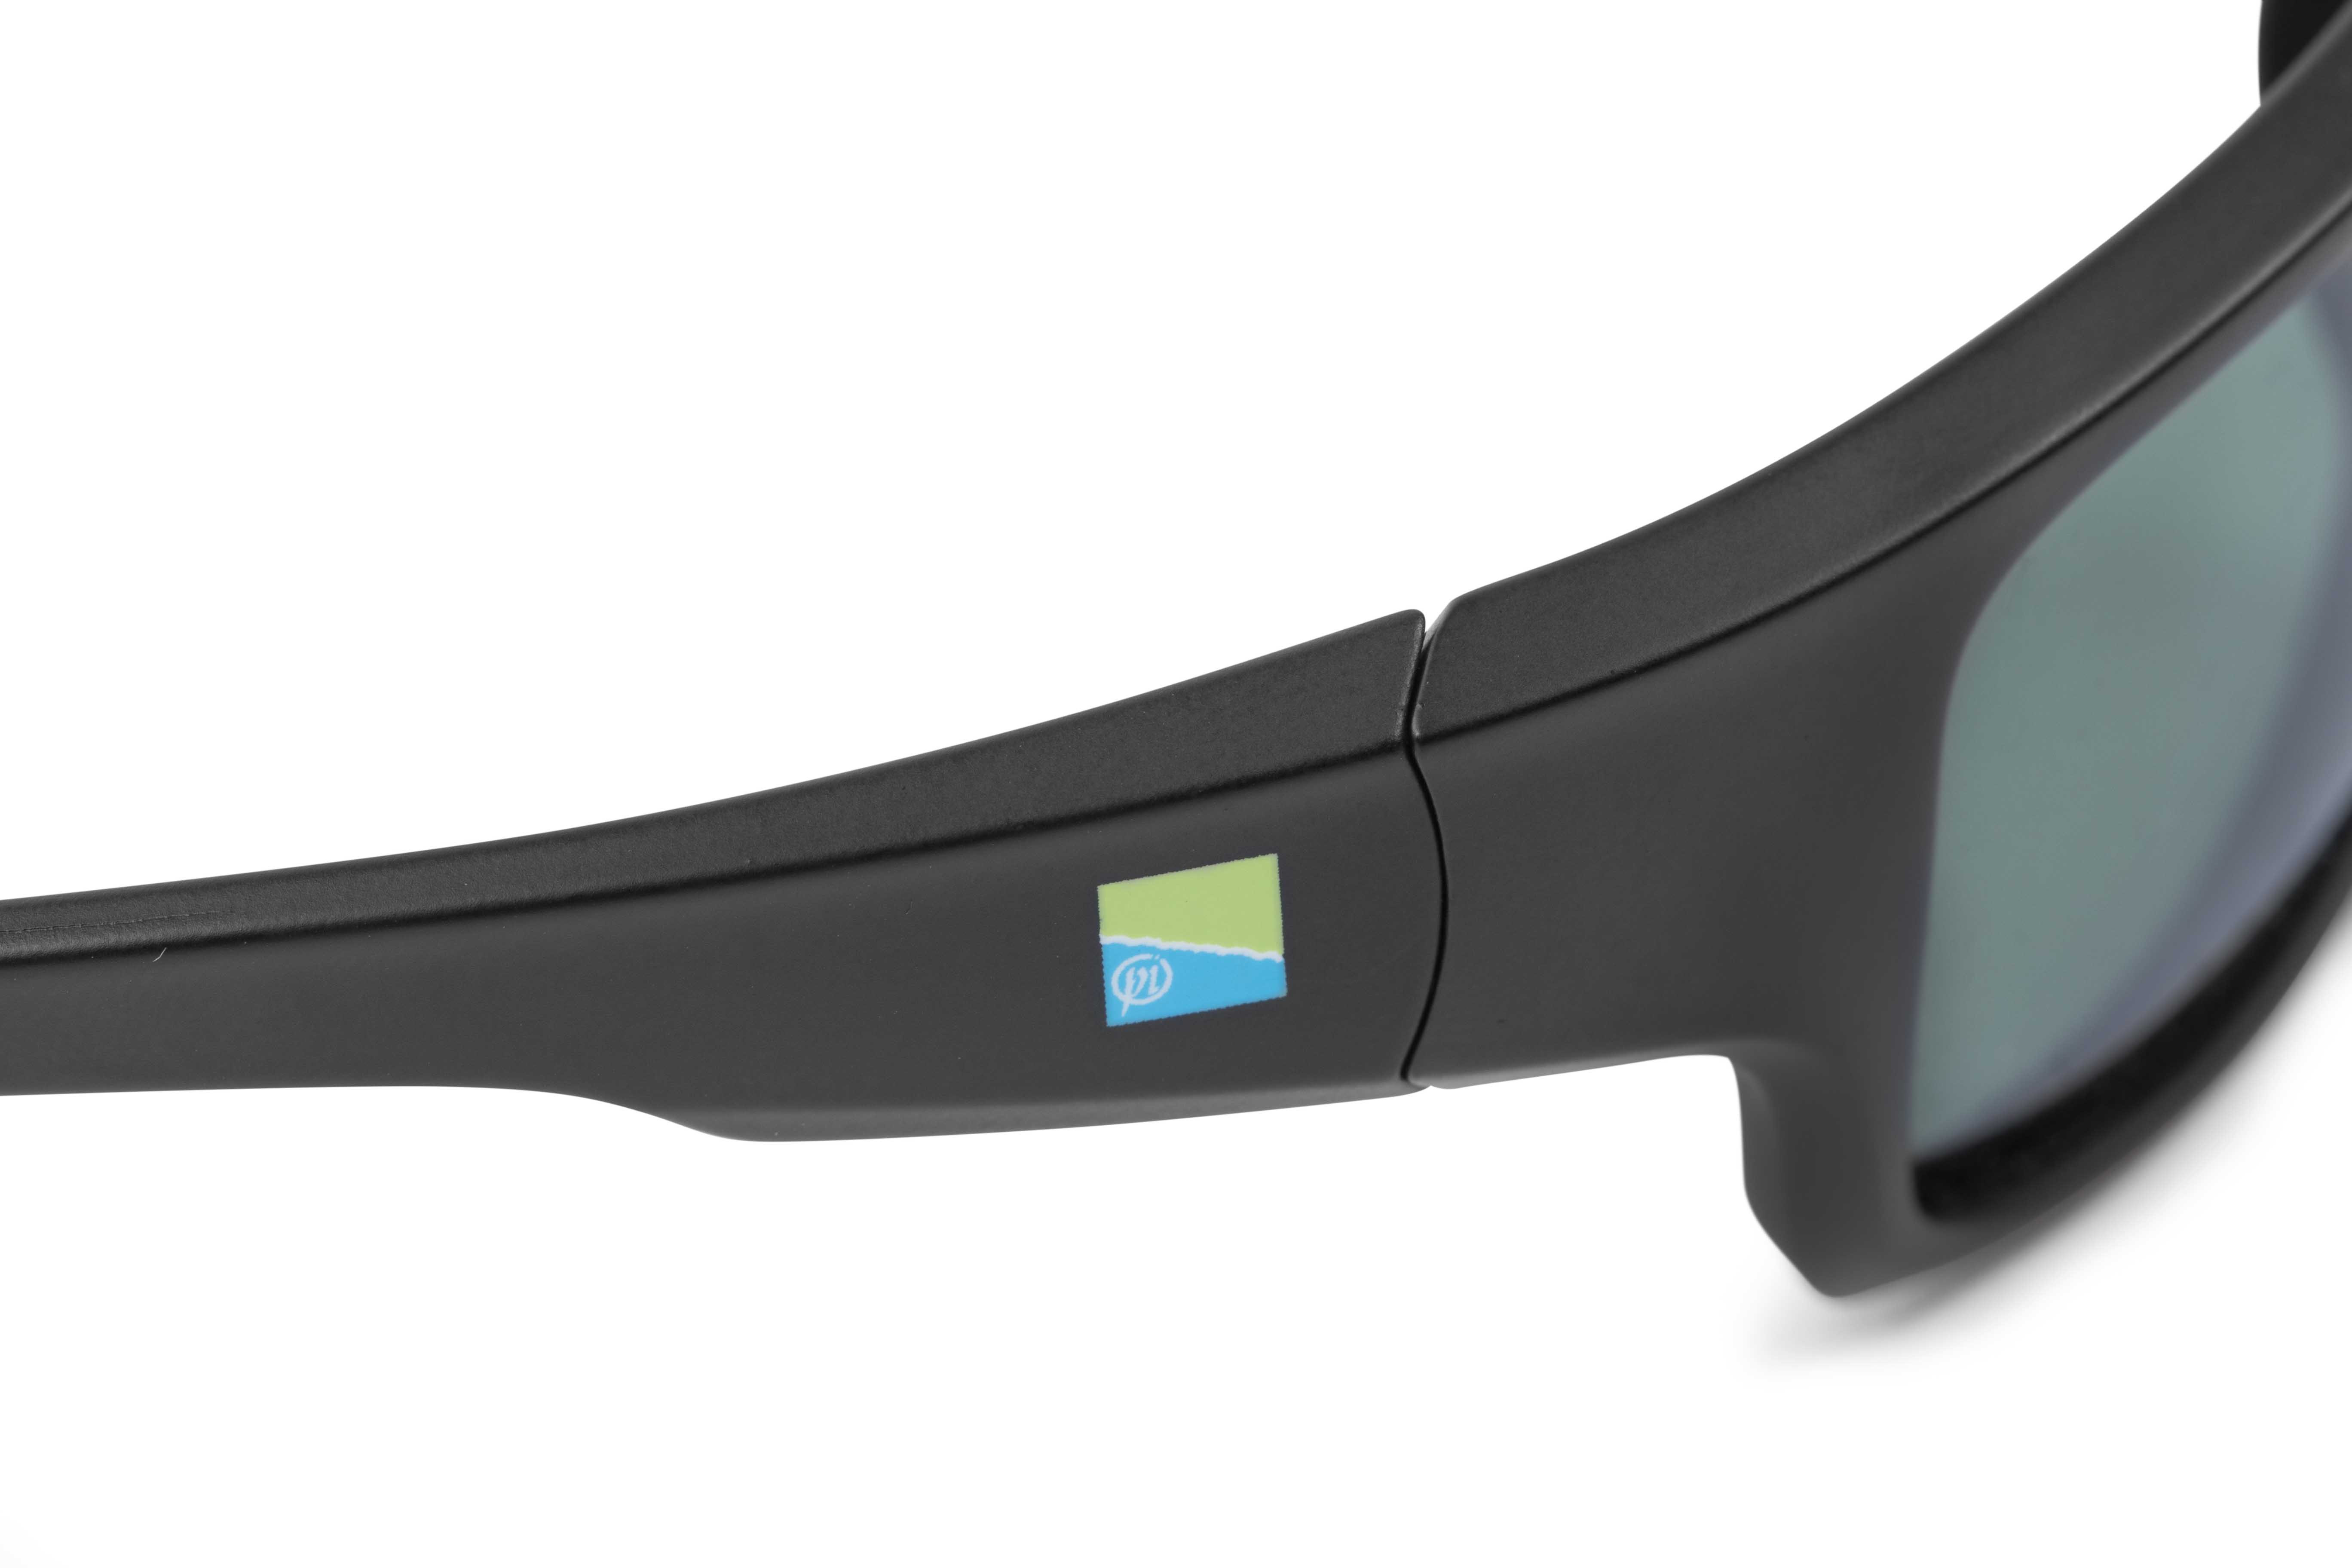 Image of Polarised Sun glasses  by  Innovations